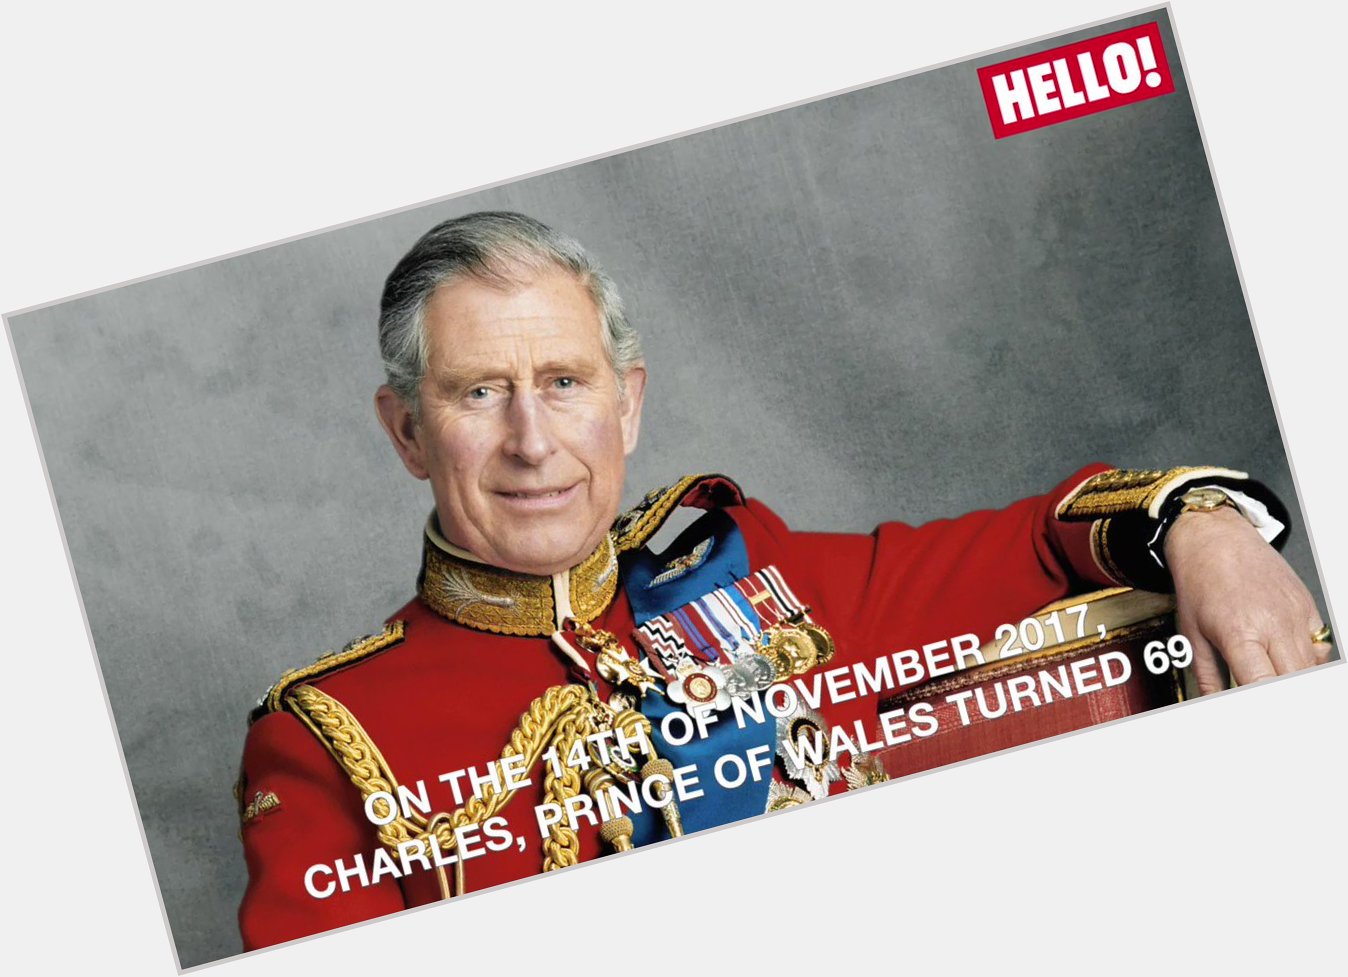 Happy birthday HRH The Prince of Wales Prince Charles turns 69 today! 